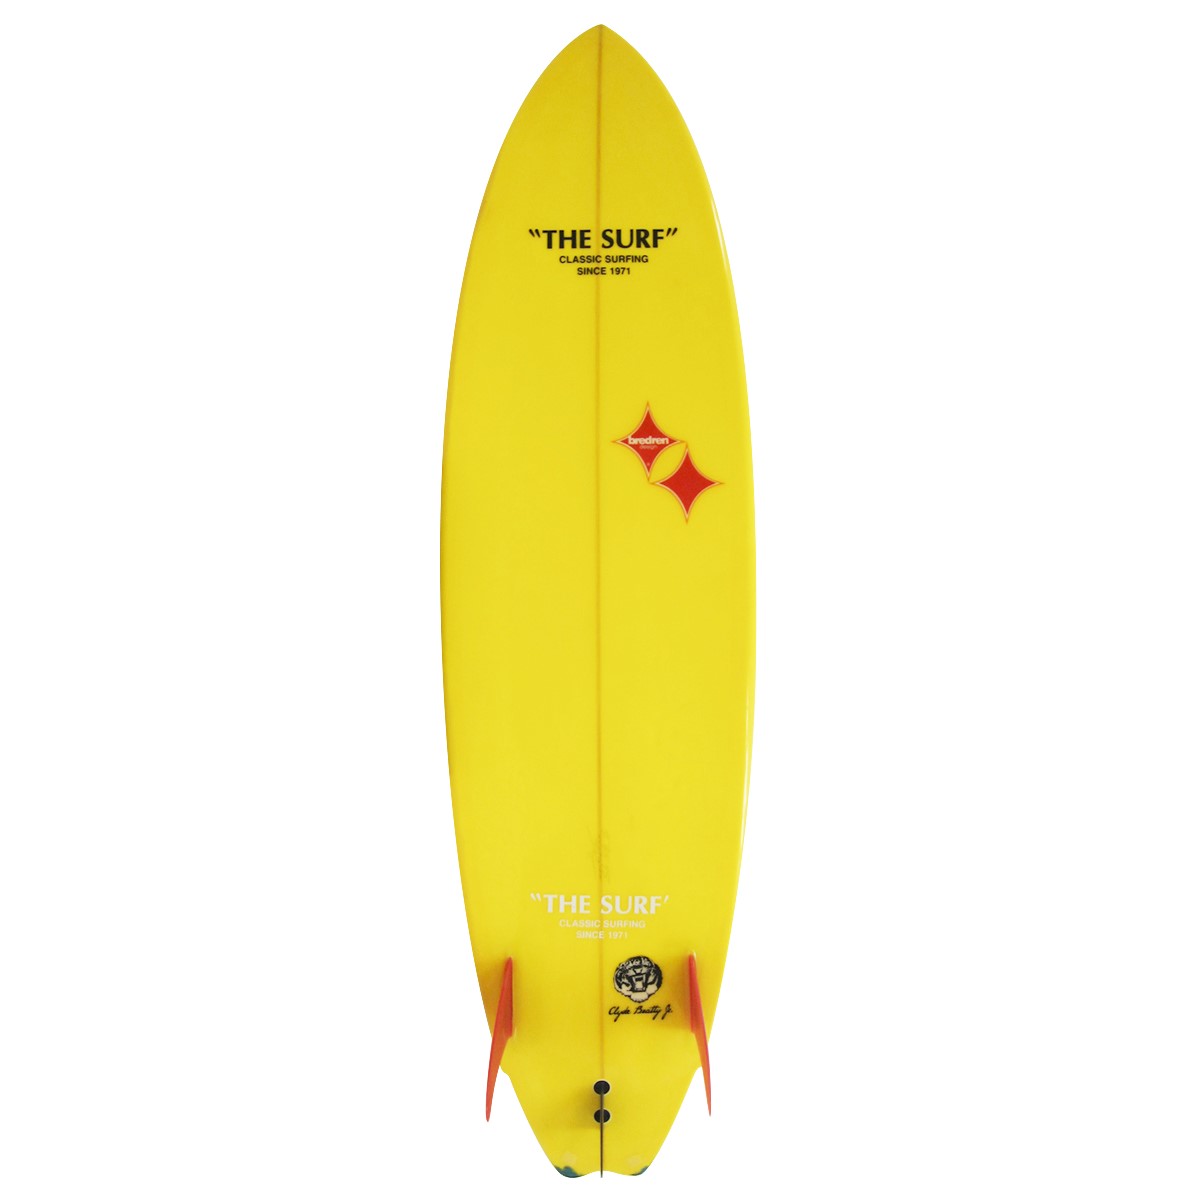 BREDREN DESIGN / MAGIC TWIN STABILIZER 6'2 Shaped By Dean Cleary 